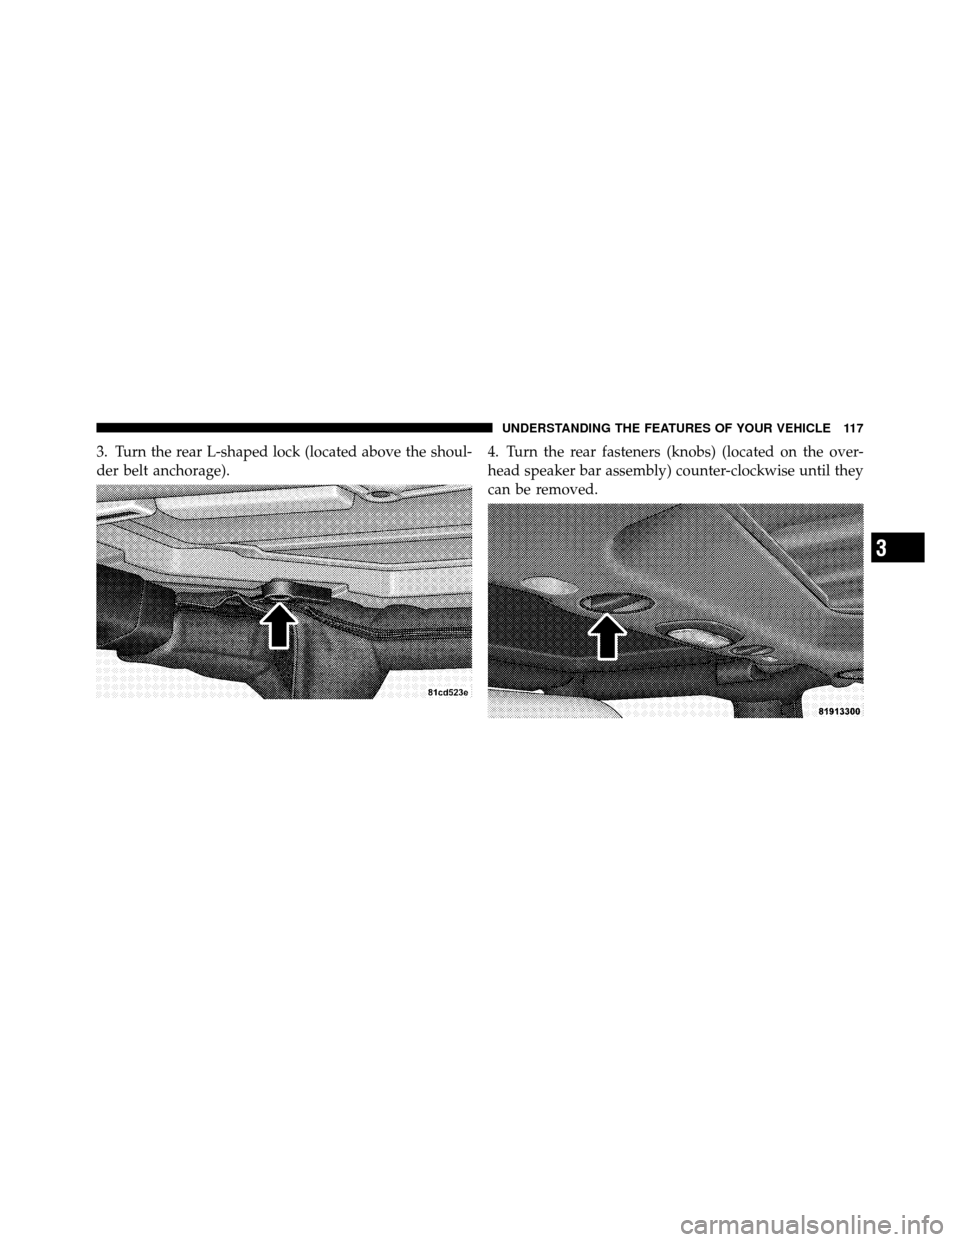 JEEP WRANGLER 2009 JK / 3.G Owners Manual 3. Turn the rear L-shaped lock (located above the shoul-
der belt anchorage).4. Turn the rear fasteners (knobs) (located on the over-
head speaker bar assembly) counter-clockwise until they
can be rem